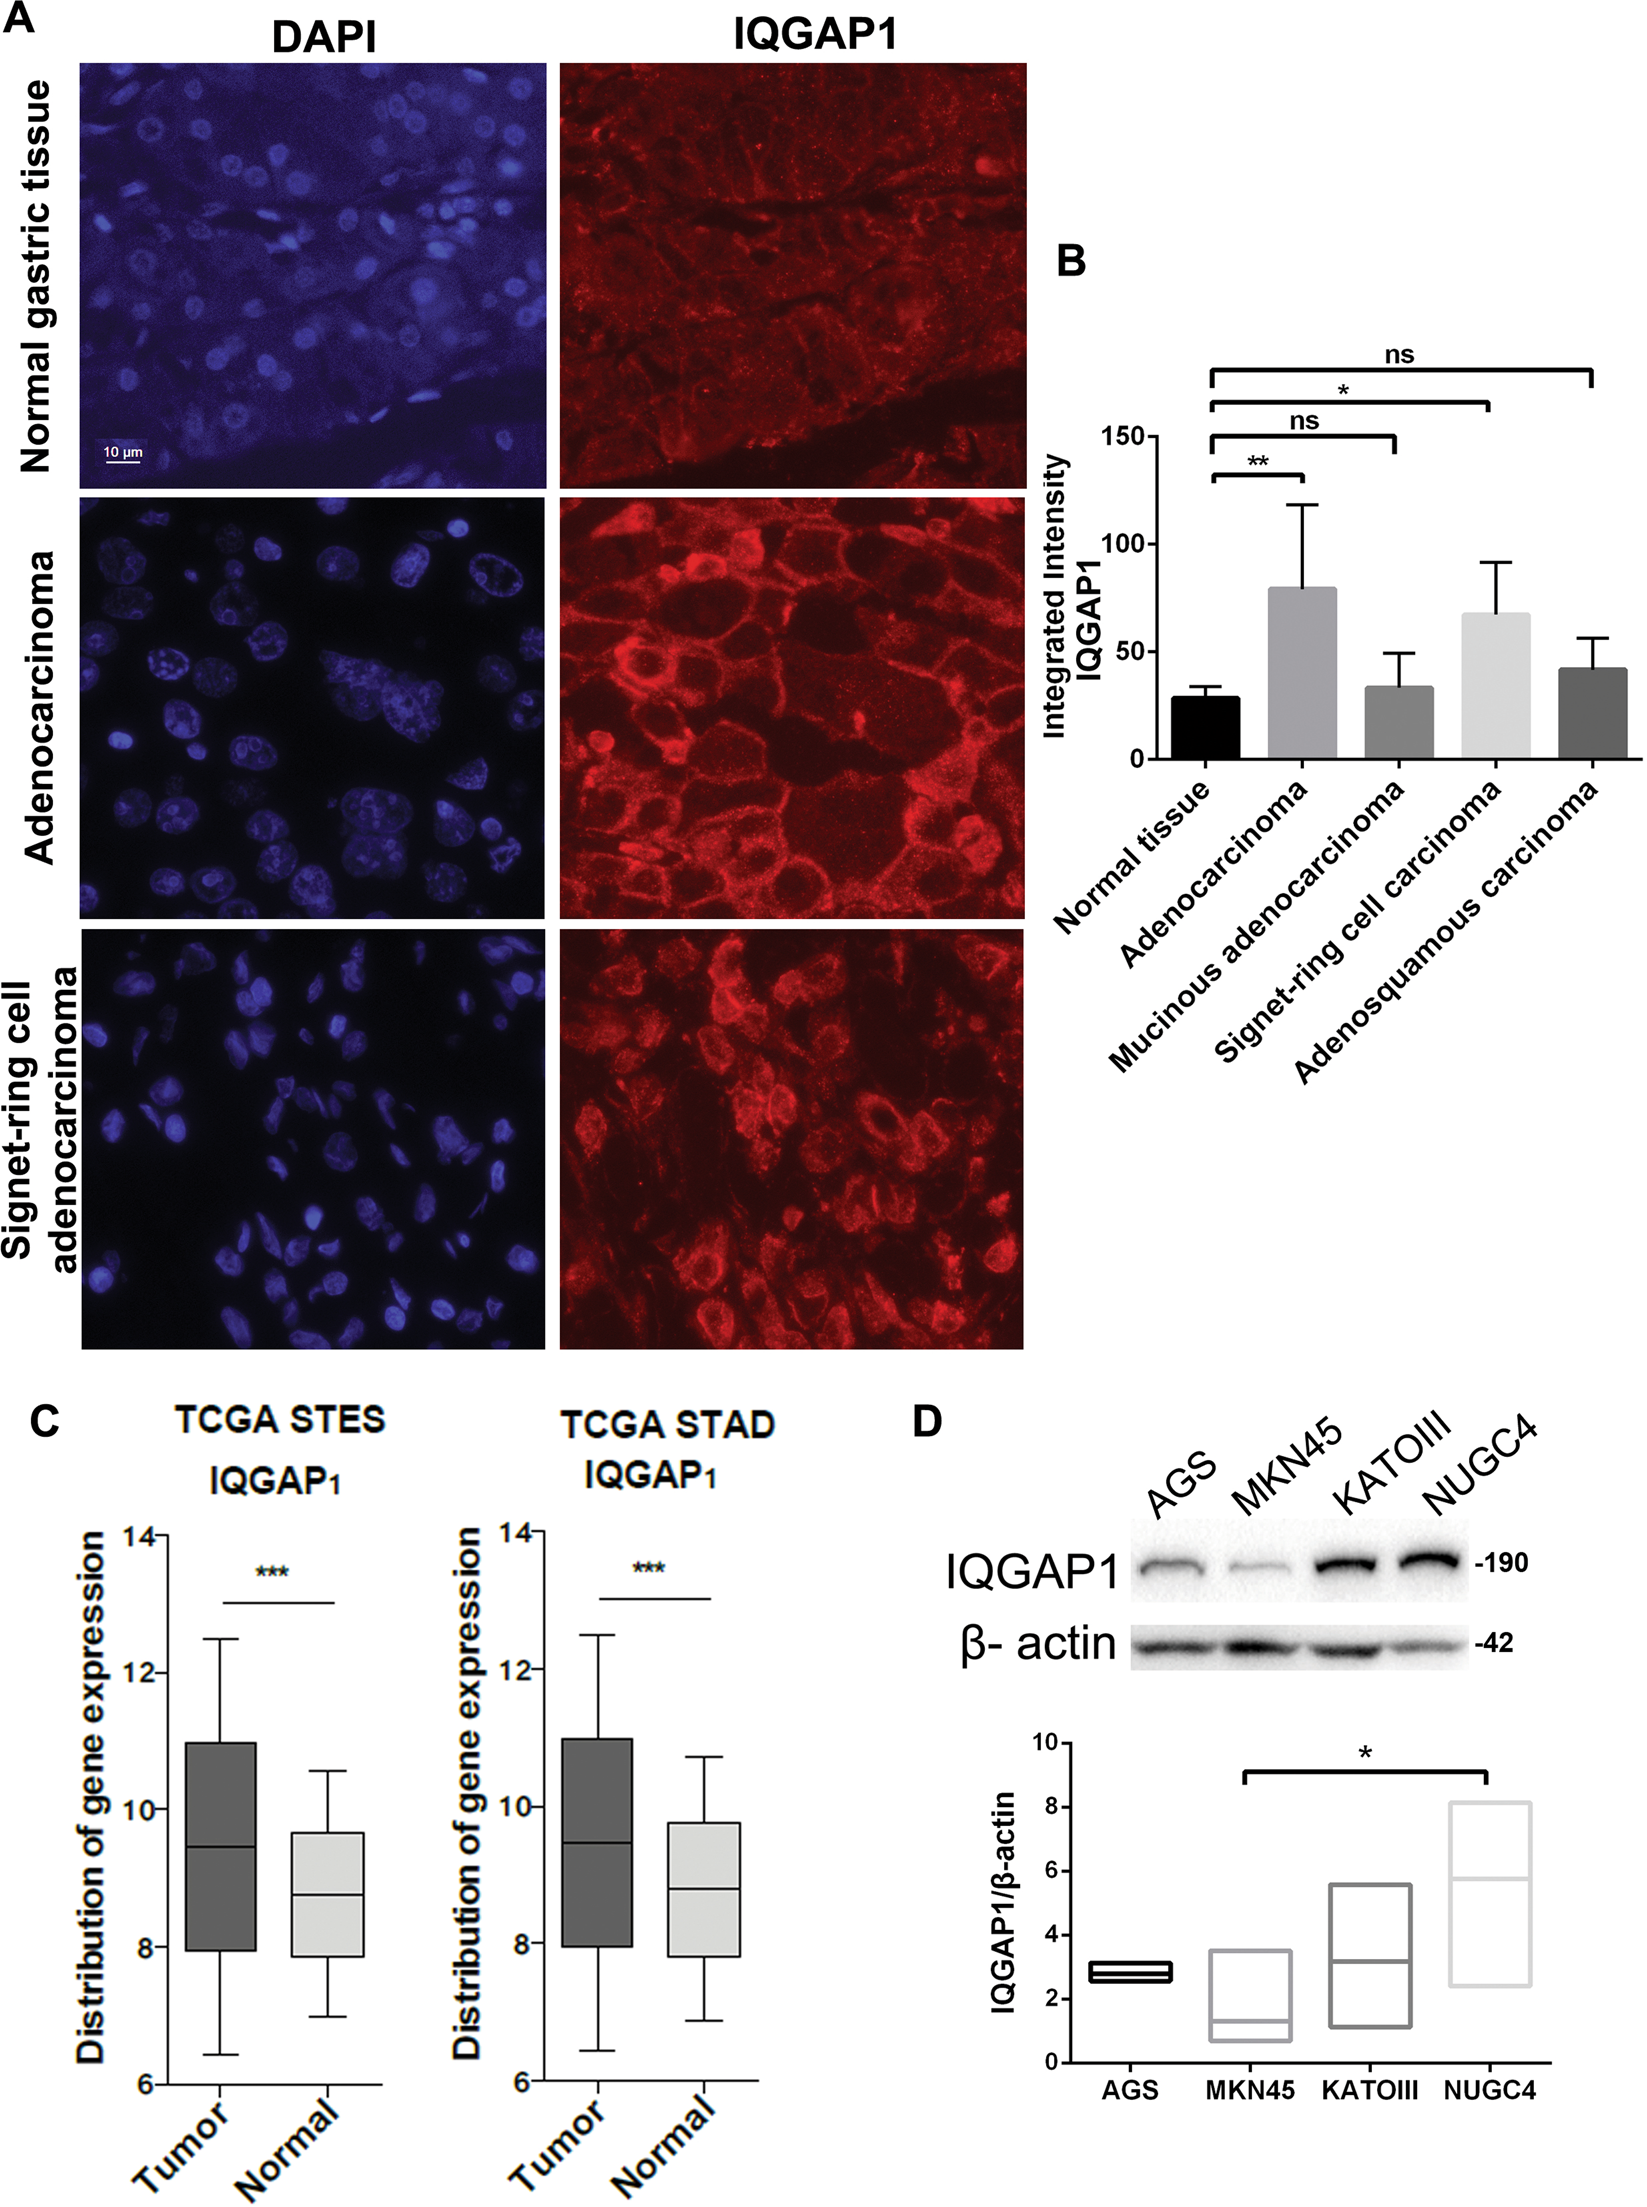 The scaffold protein IQGAP1 links heat-induced stress signals to